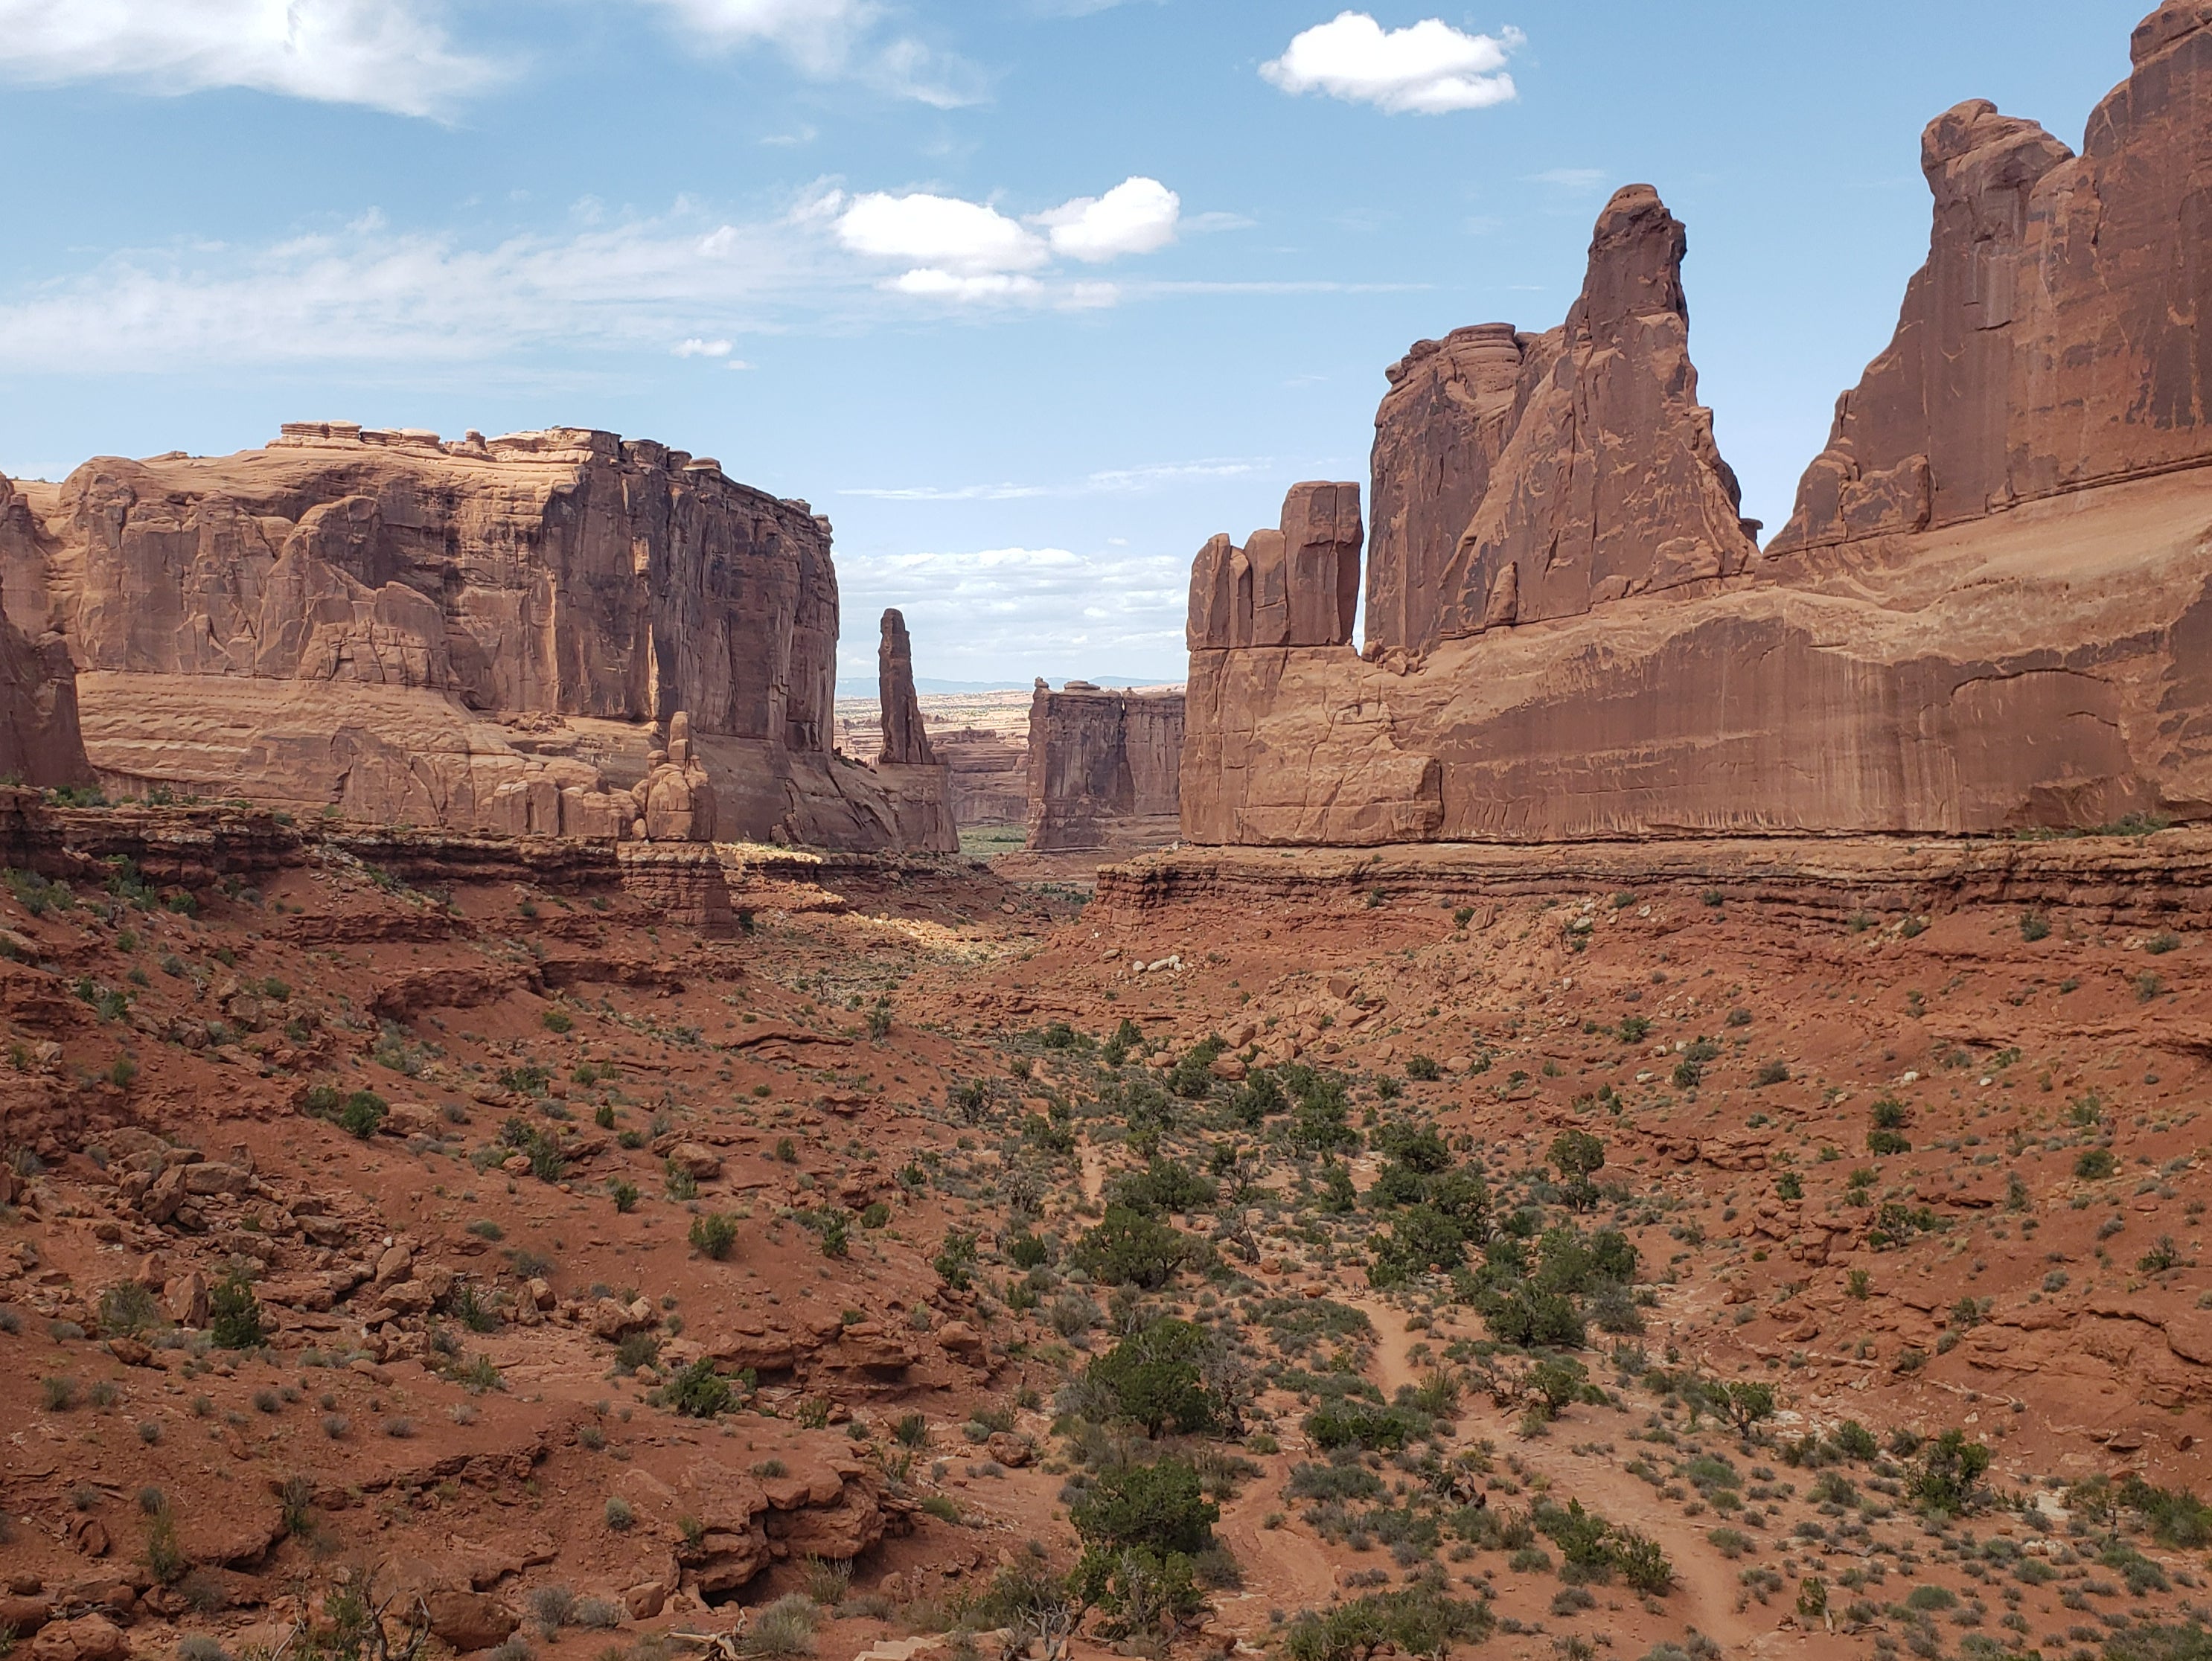 Weather-sculpted sandstone in Arches National Park